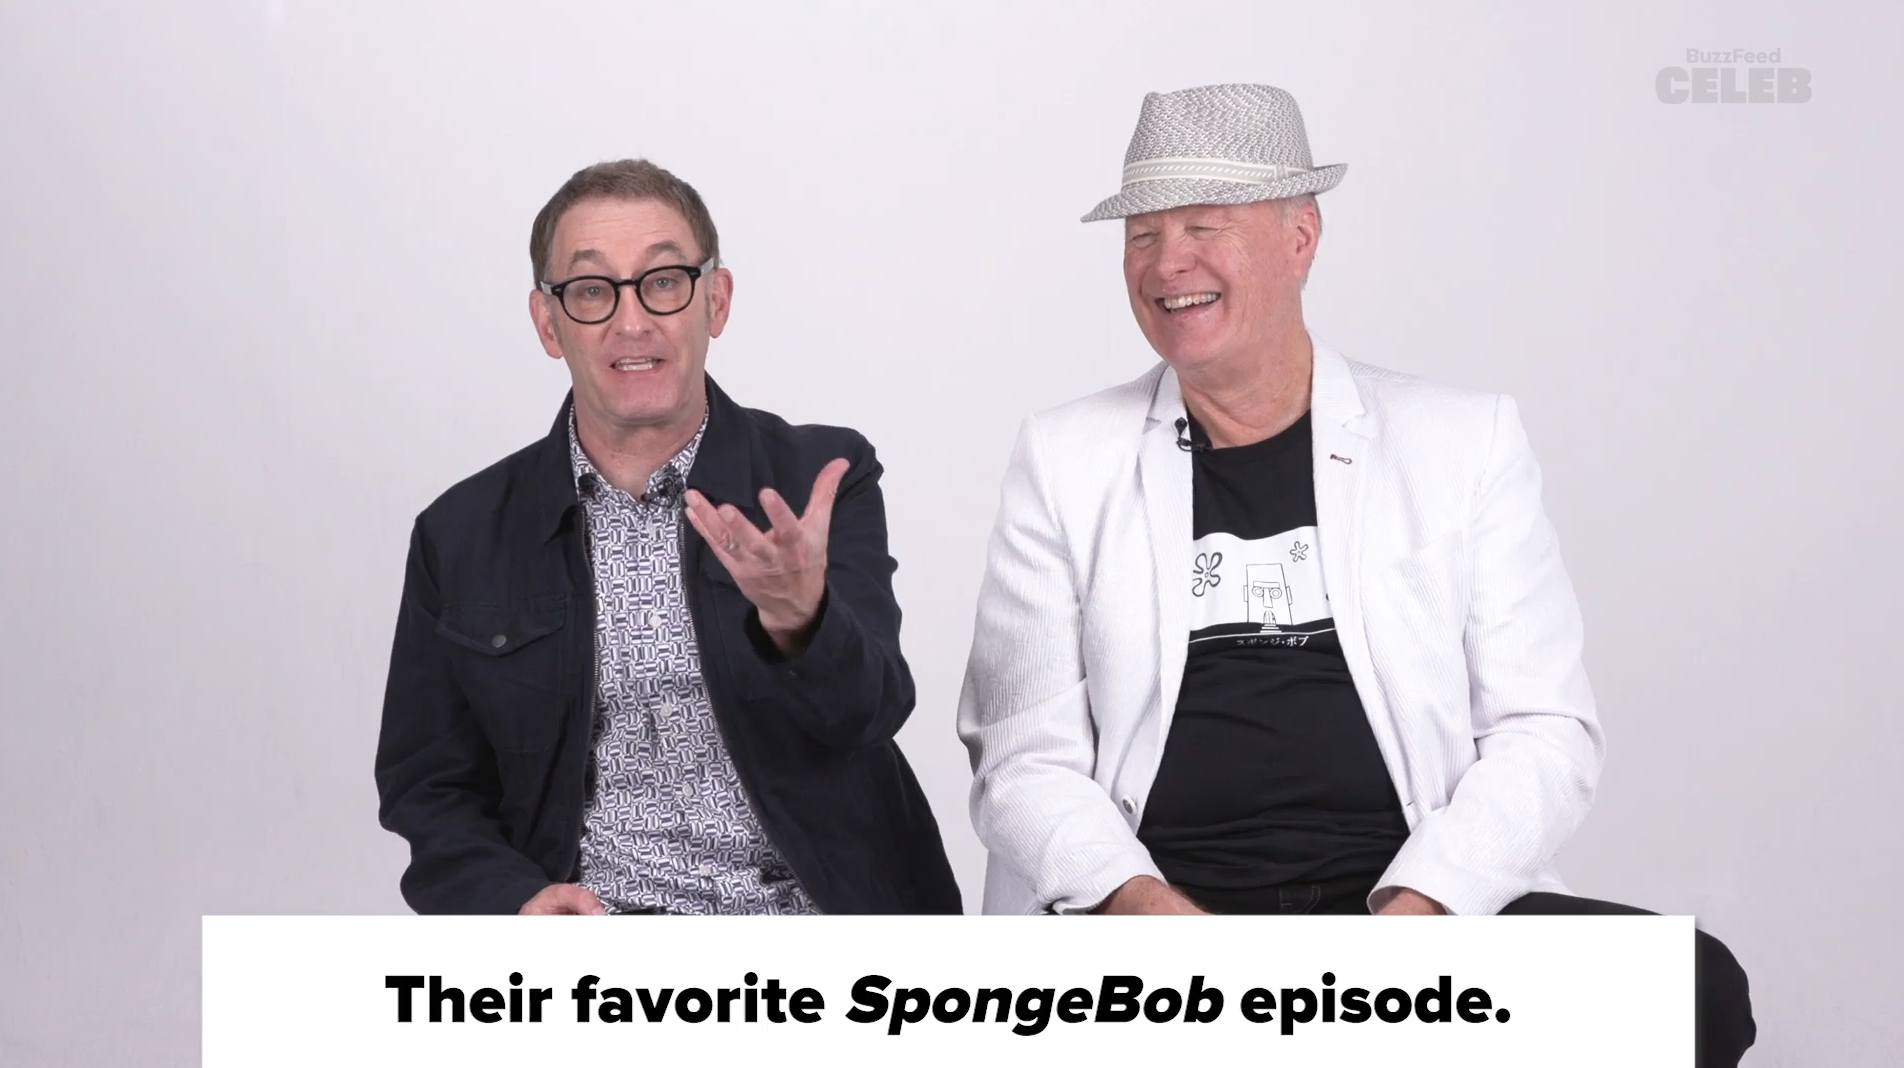 Tom Kenny and Bill Fagerbakke sitting together, smiling, discussing their favorite SpongeBob episode for BuzzFeed Celeb